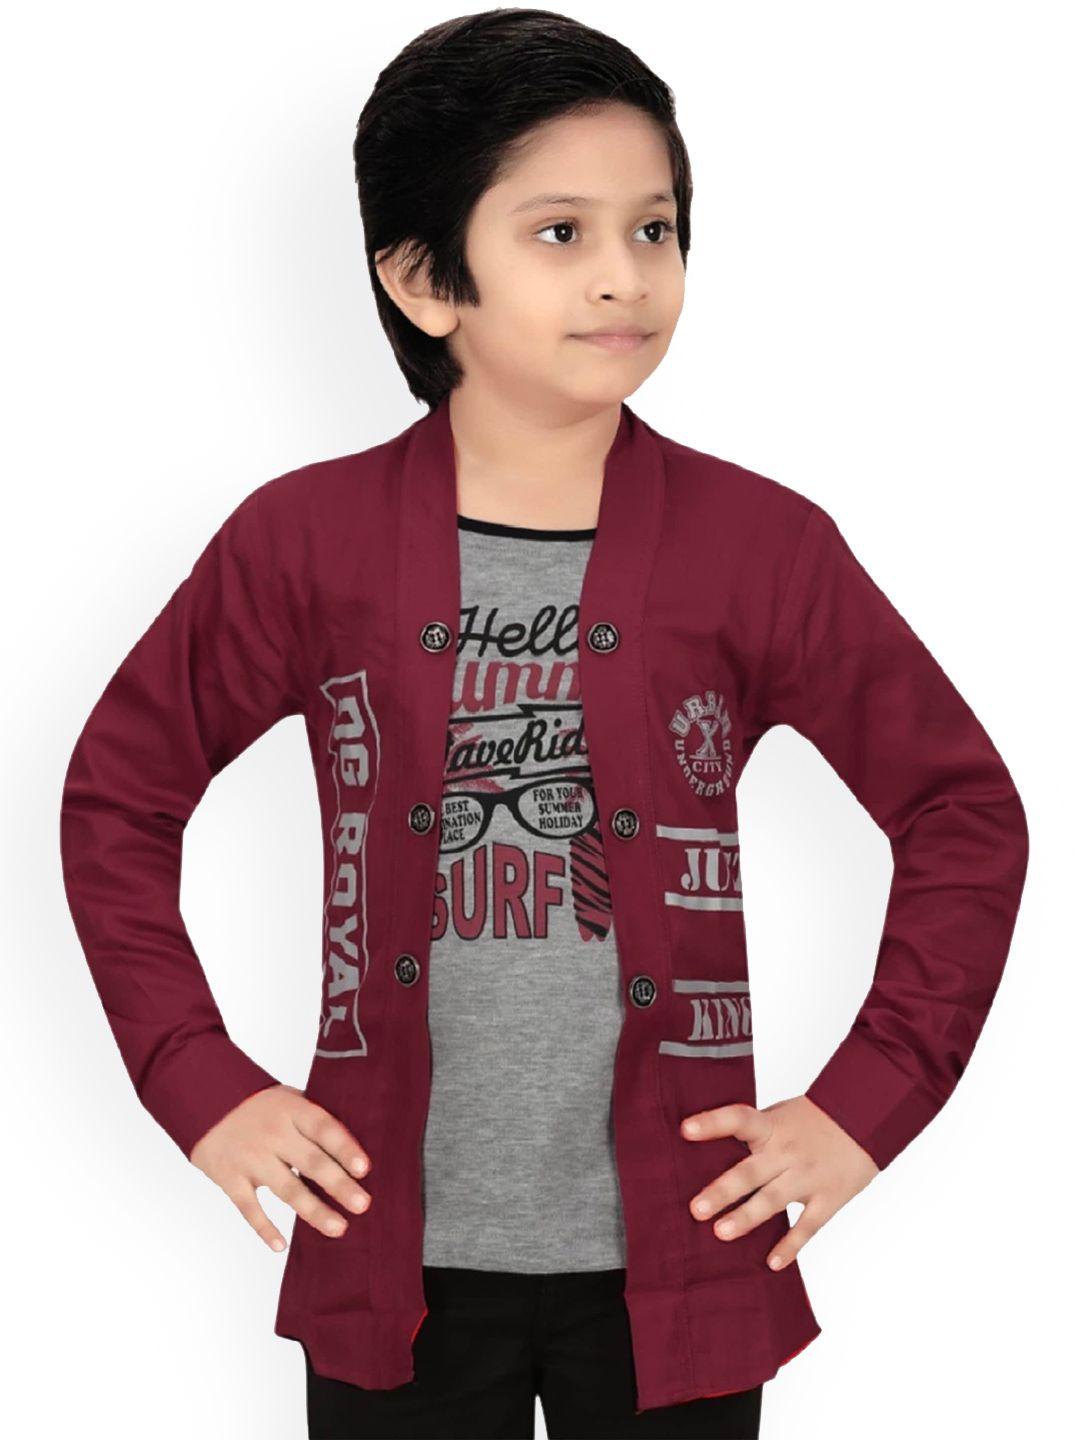 baesd boys typography printed lightweight open front  jacket with attached t-shirt